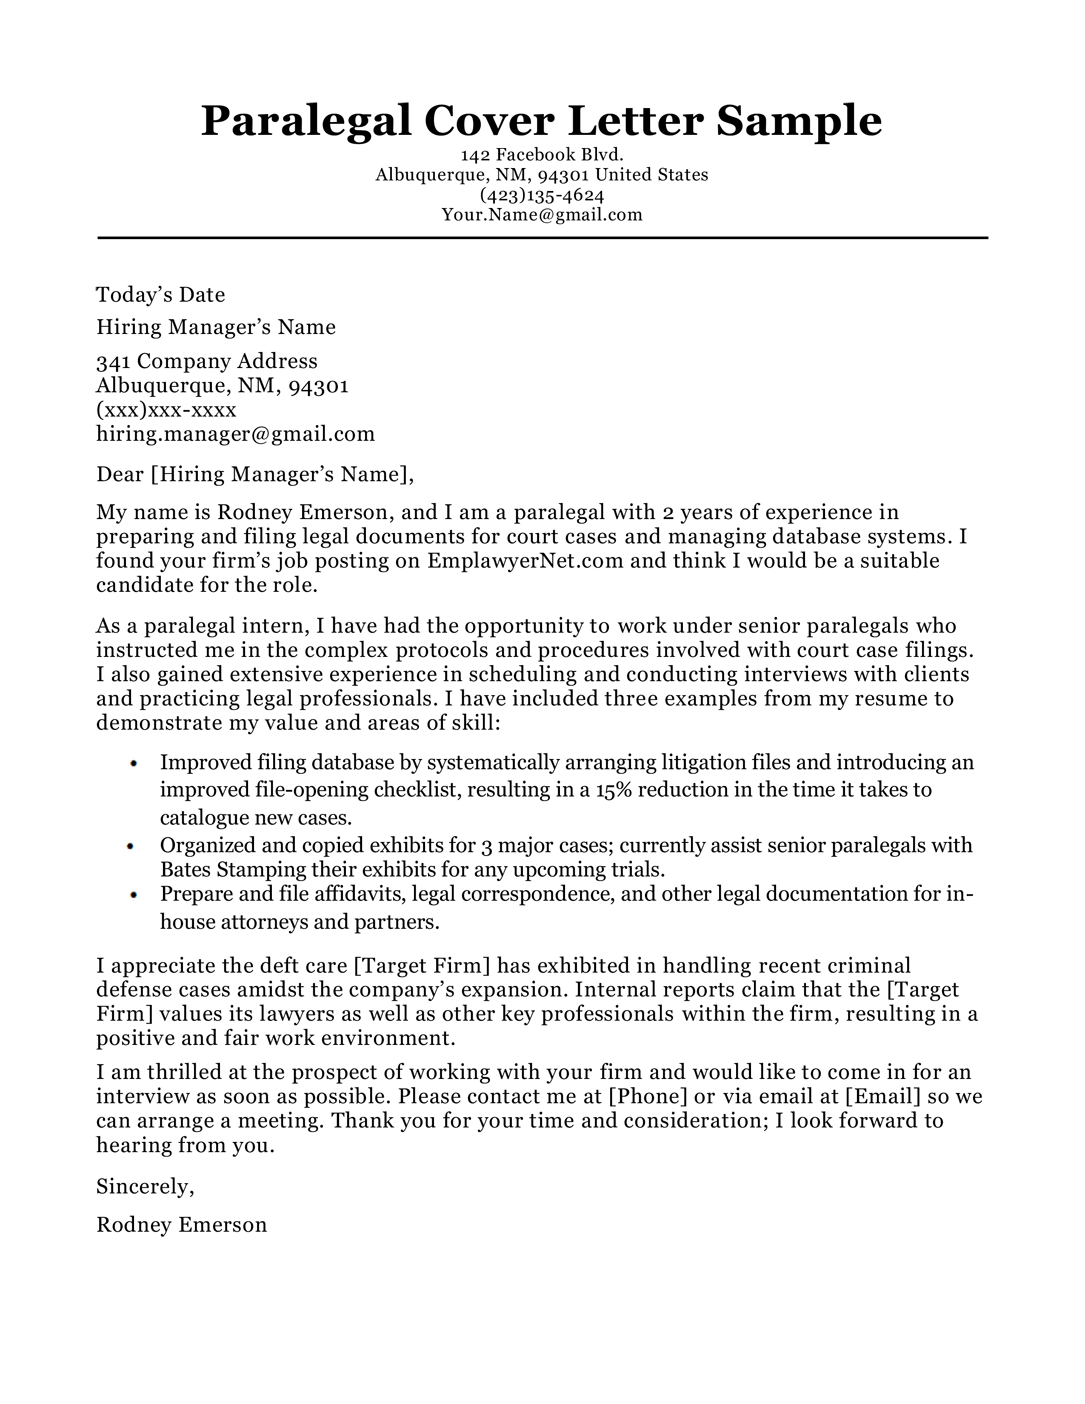 Law Firm Cover Letter Samples from resumecompanion.com